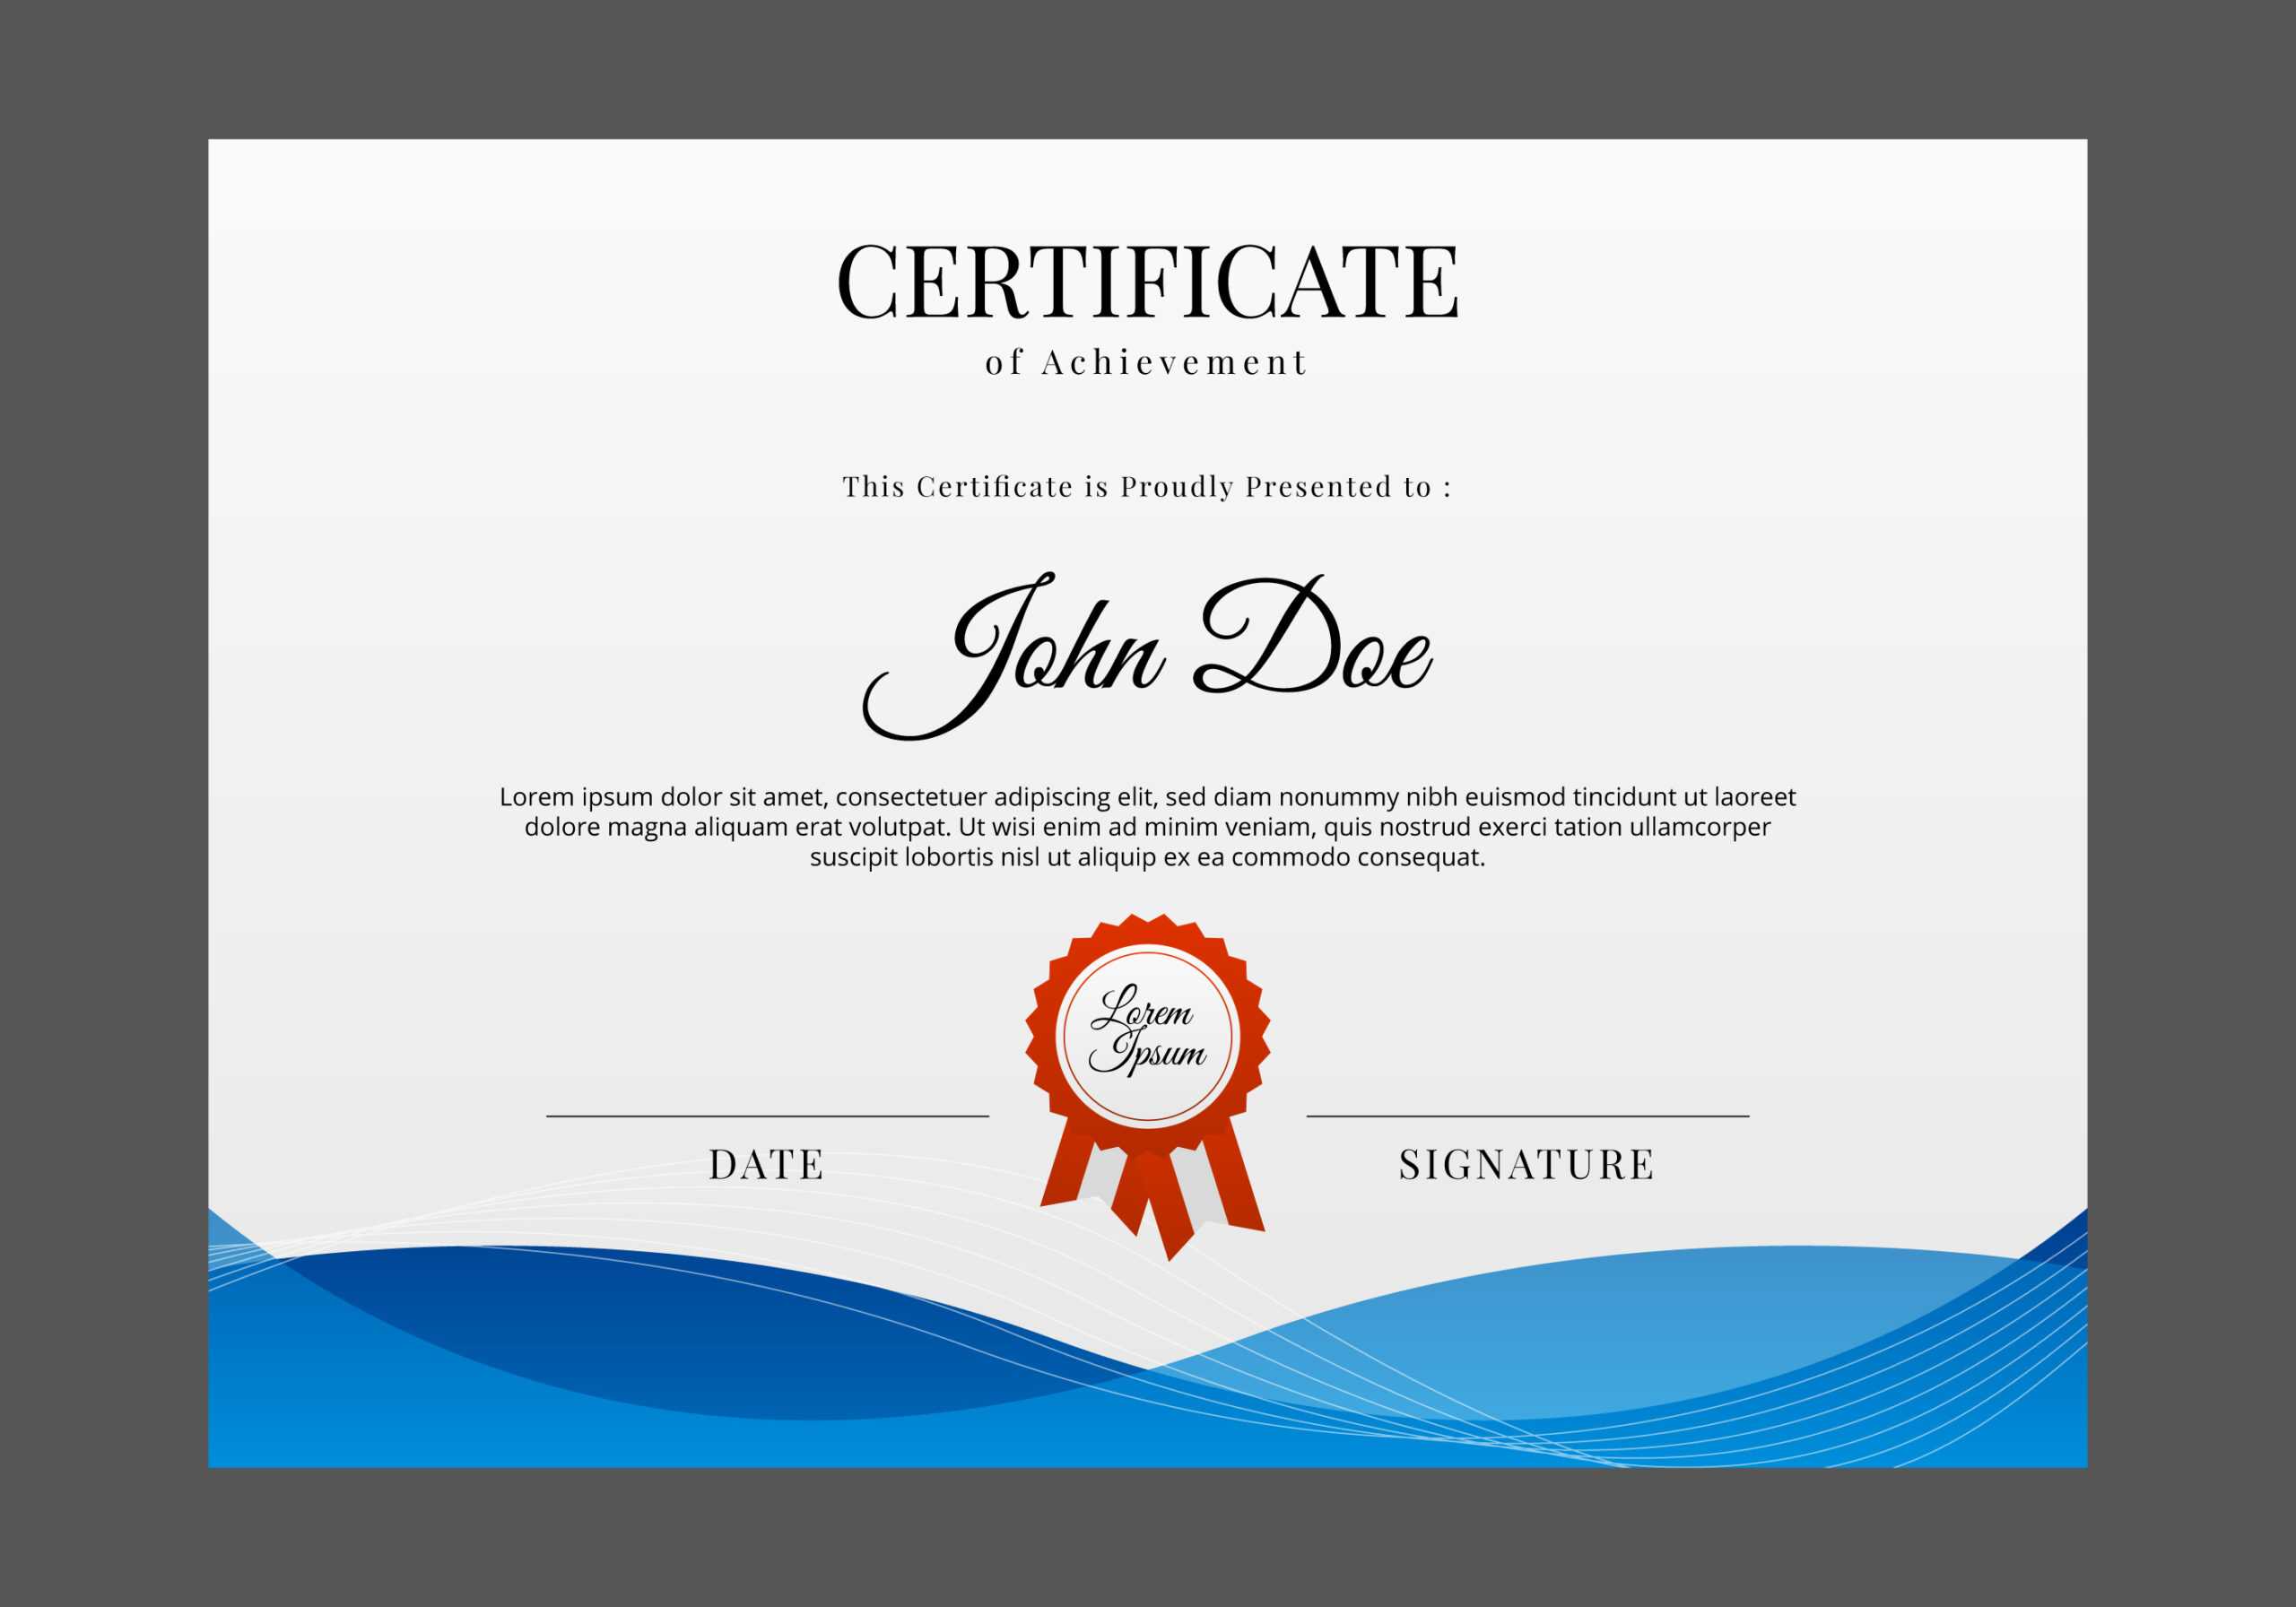 Certificate Templates, Free Certificate Designs With Regard To Certificate Templates For Word Free Downloads